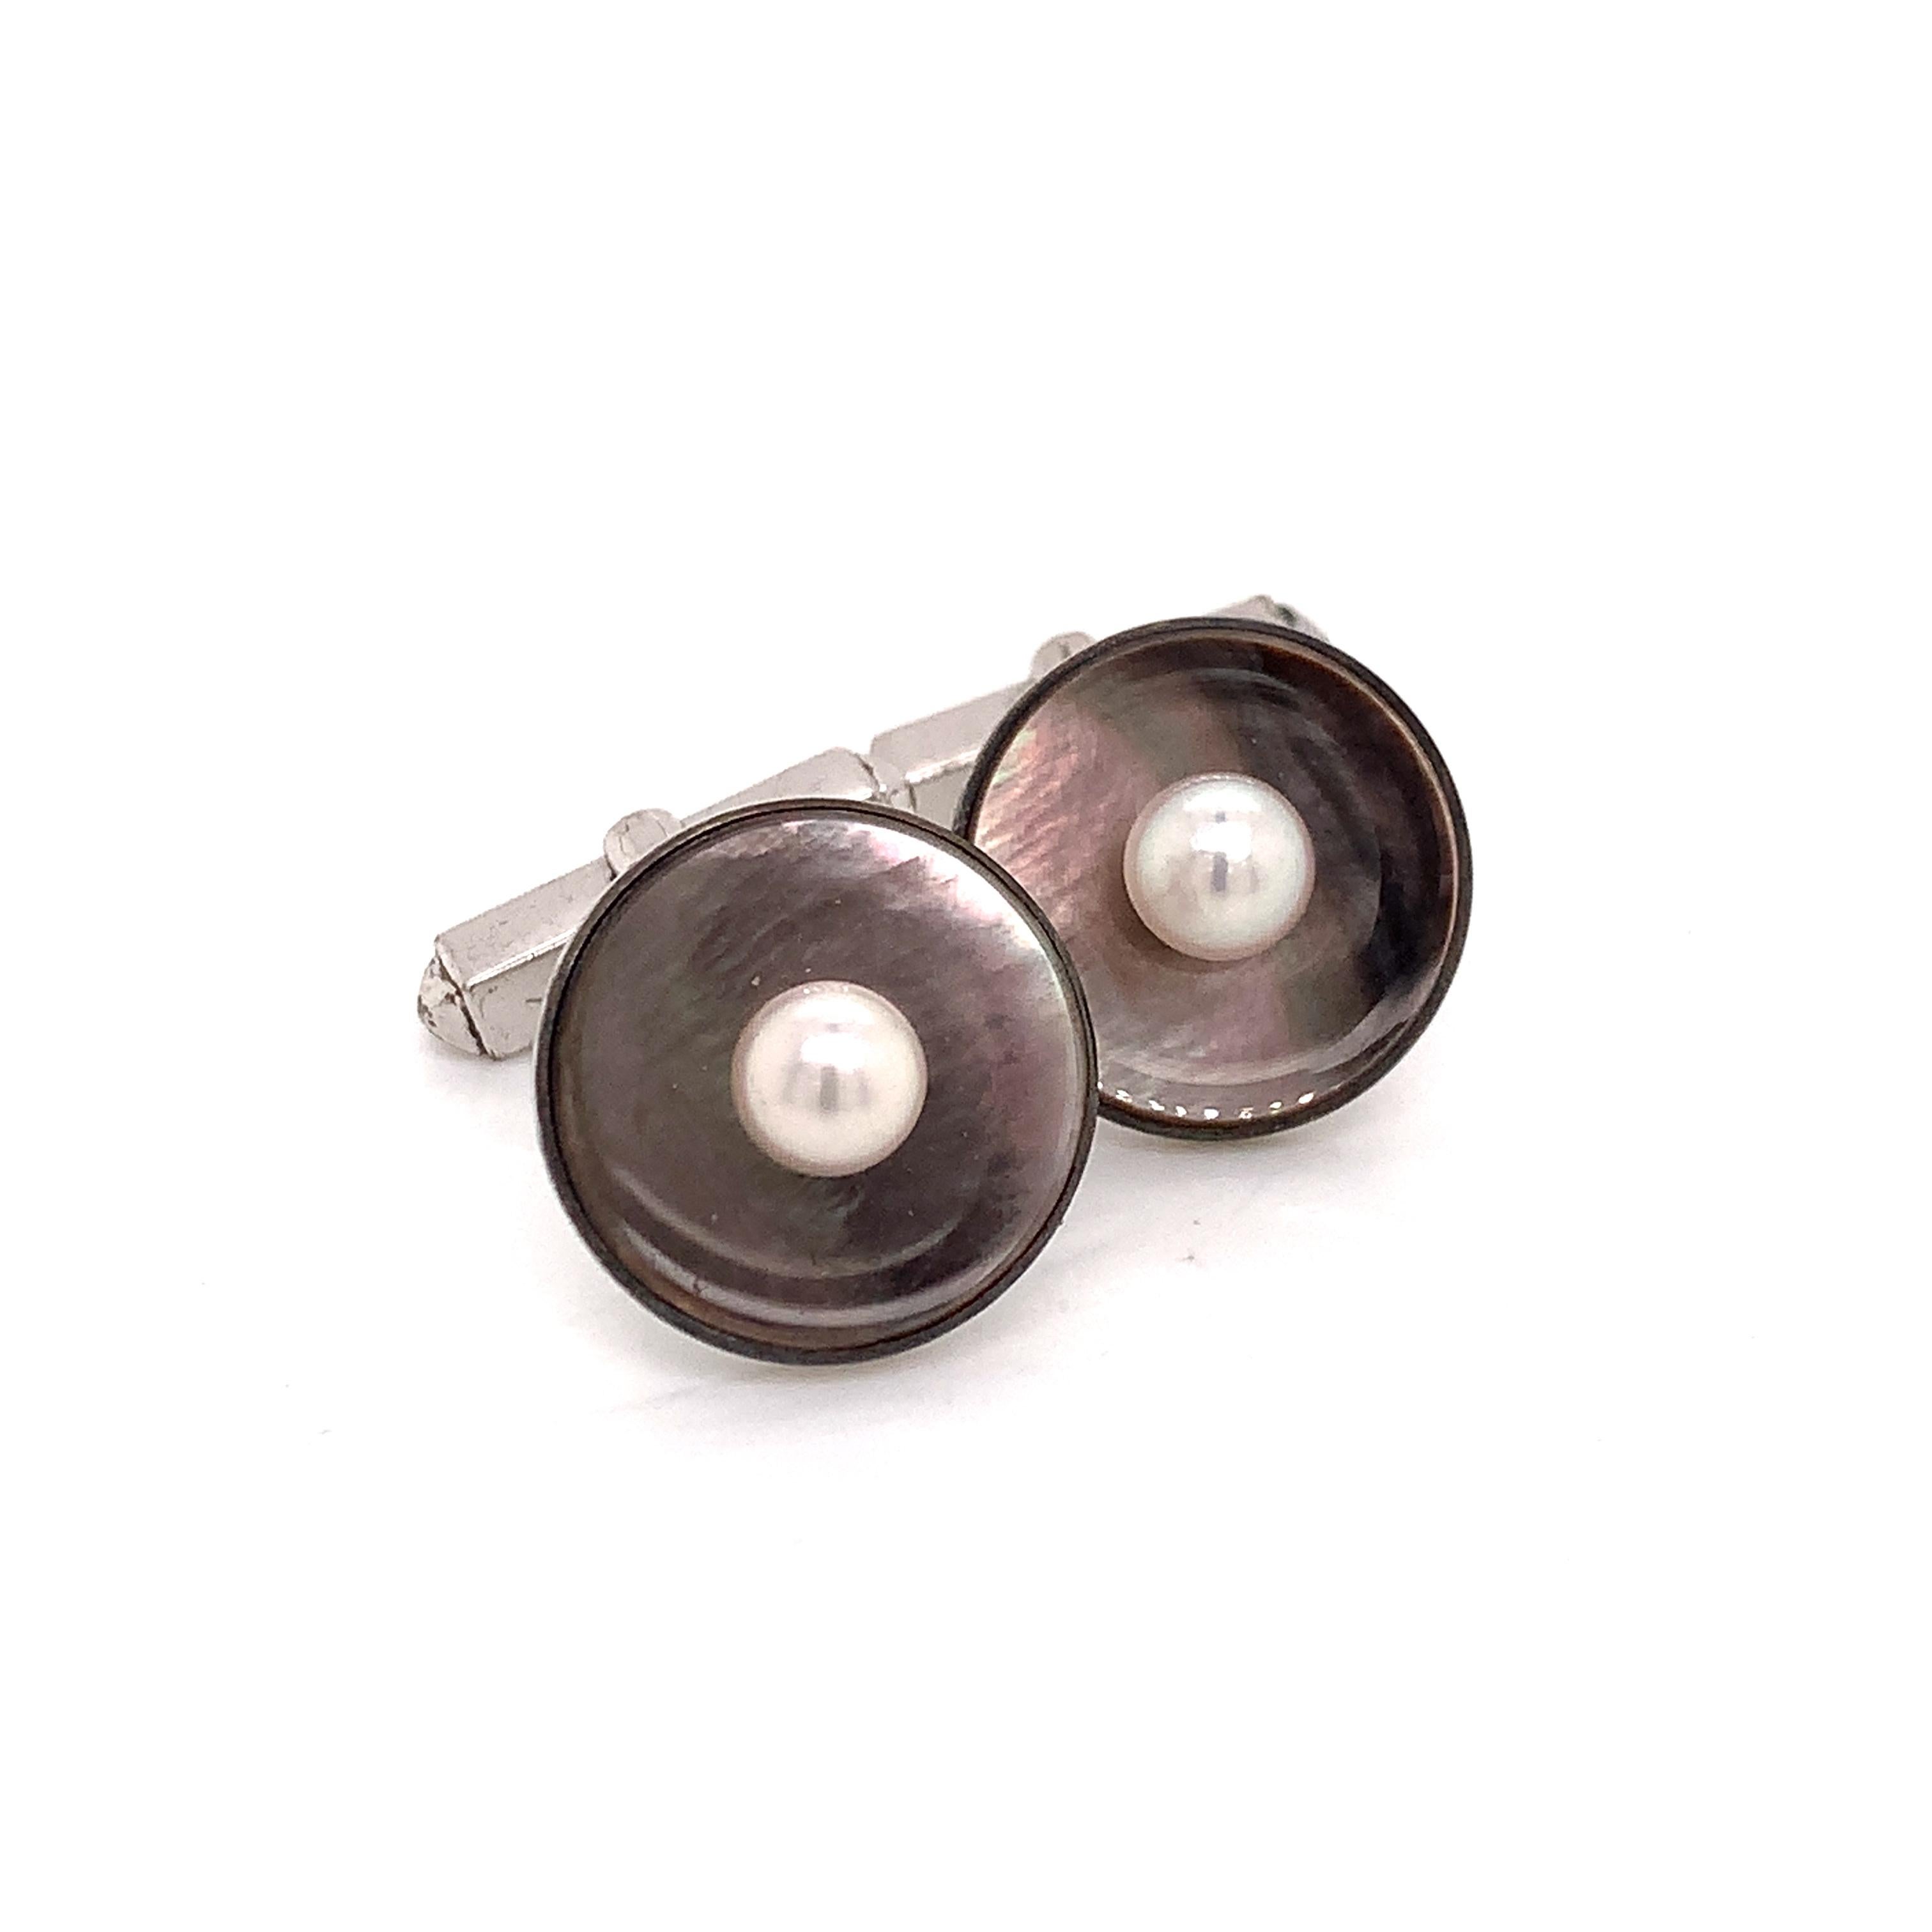 Mikimoto Estate Akoya Pearl Abalone Cufflinks Sterling Silver 5.5 mm 7.24gr M188

TRUSTED SELLER SINCE 2002
PLEASE SEE OUR HUNDREDS OF POSITIVE FEEDBACKS FROM OUR CLIENTS!!
FREE SHIPPING

This elegant Authentic Mikimoto Men's Sterling Cufflinks has